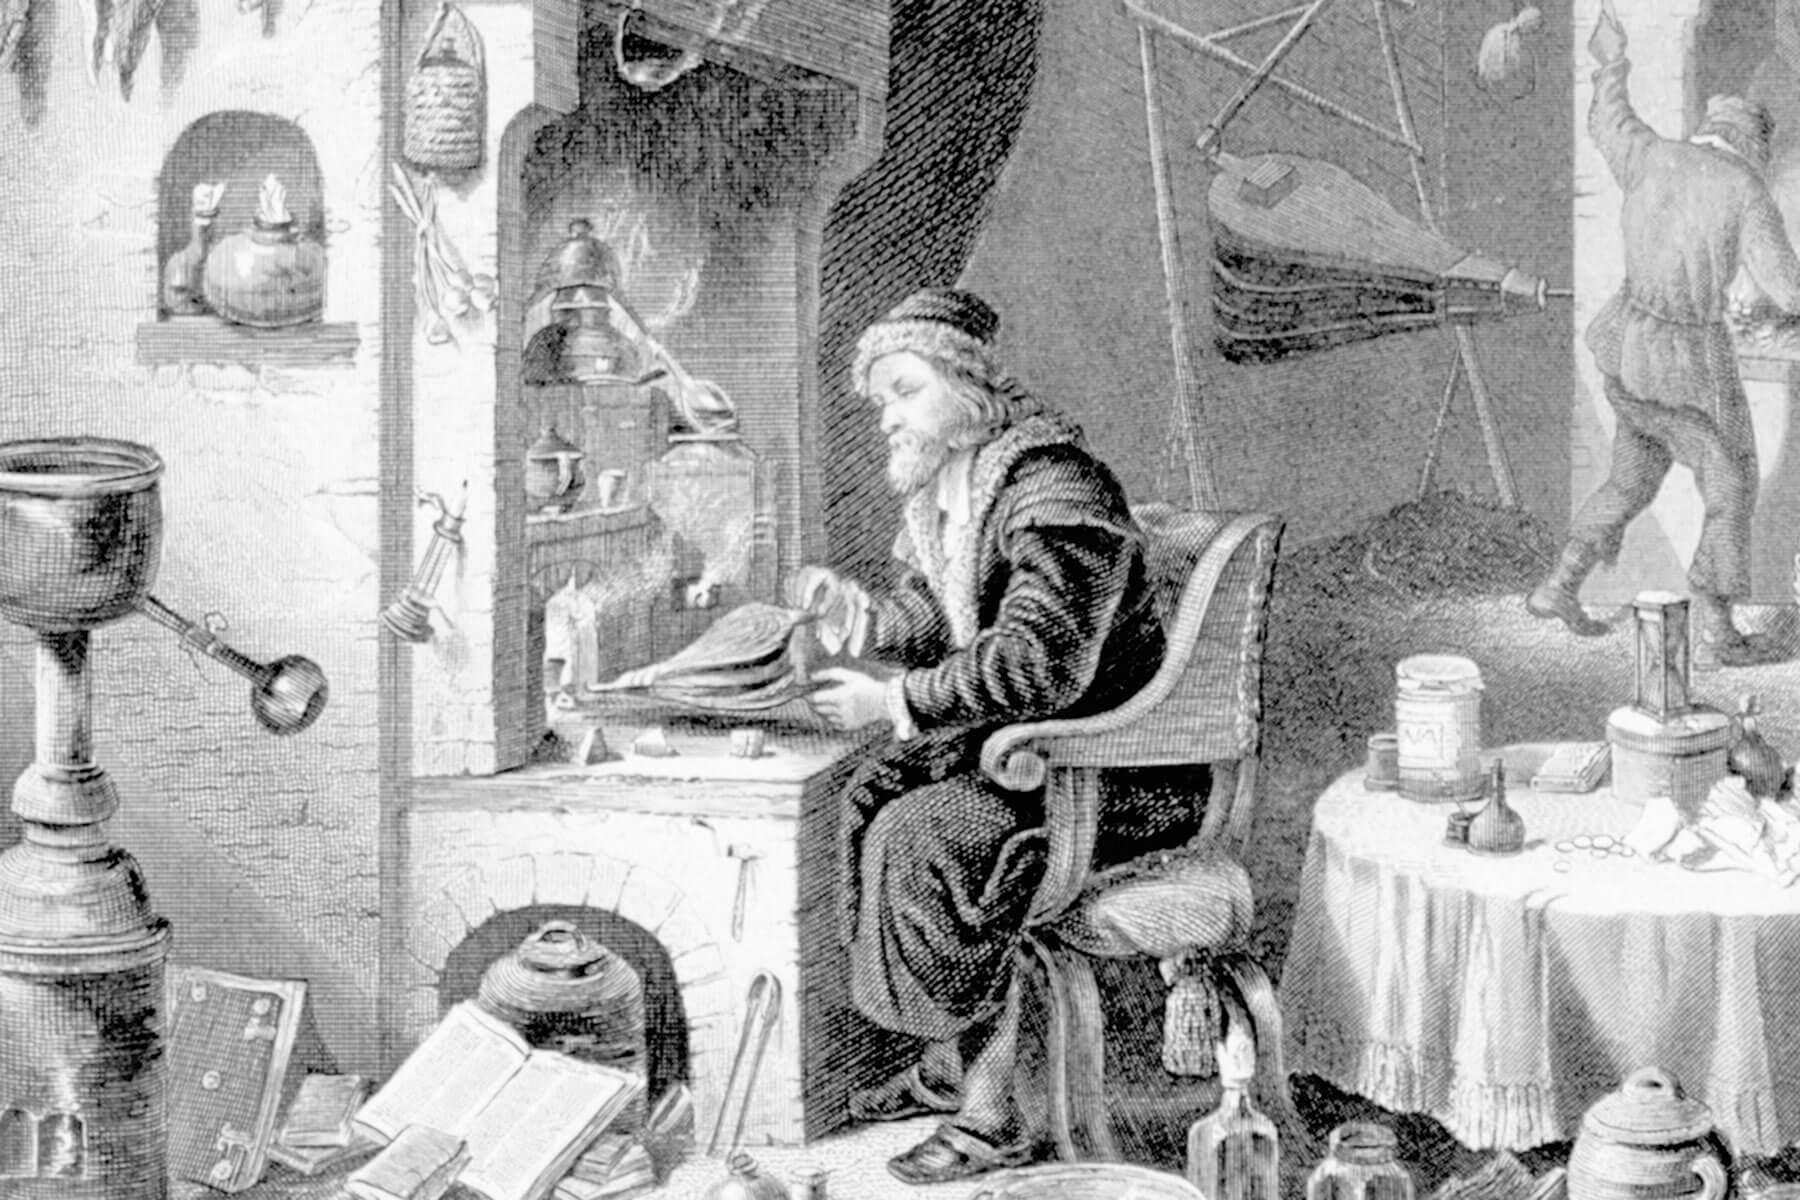 Engraving of an Alchemist